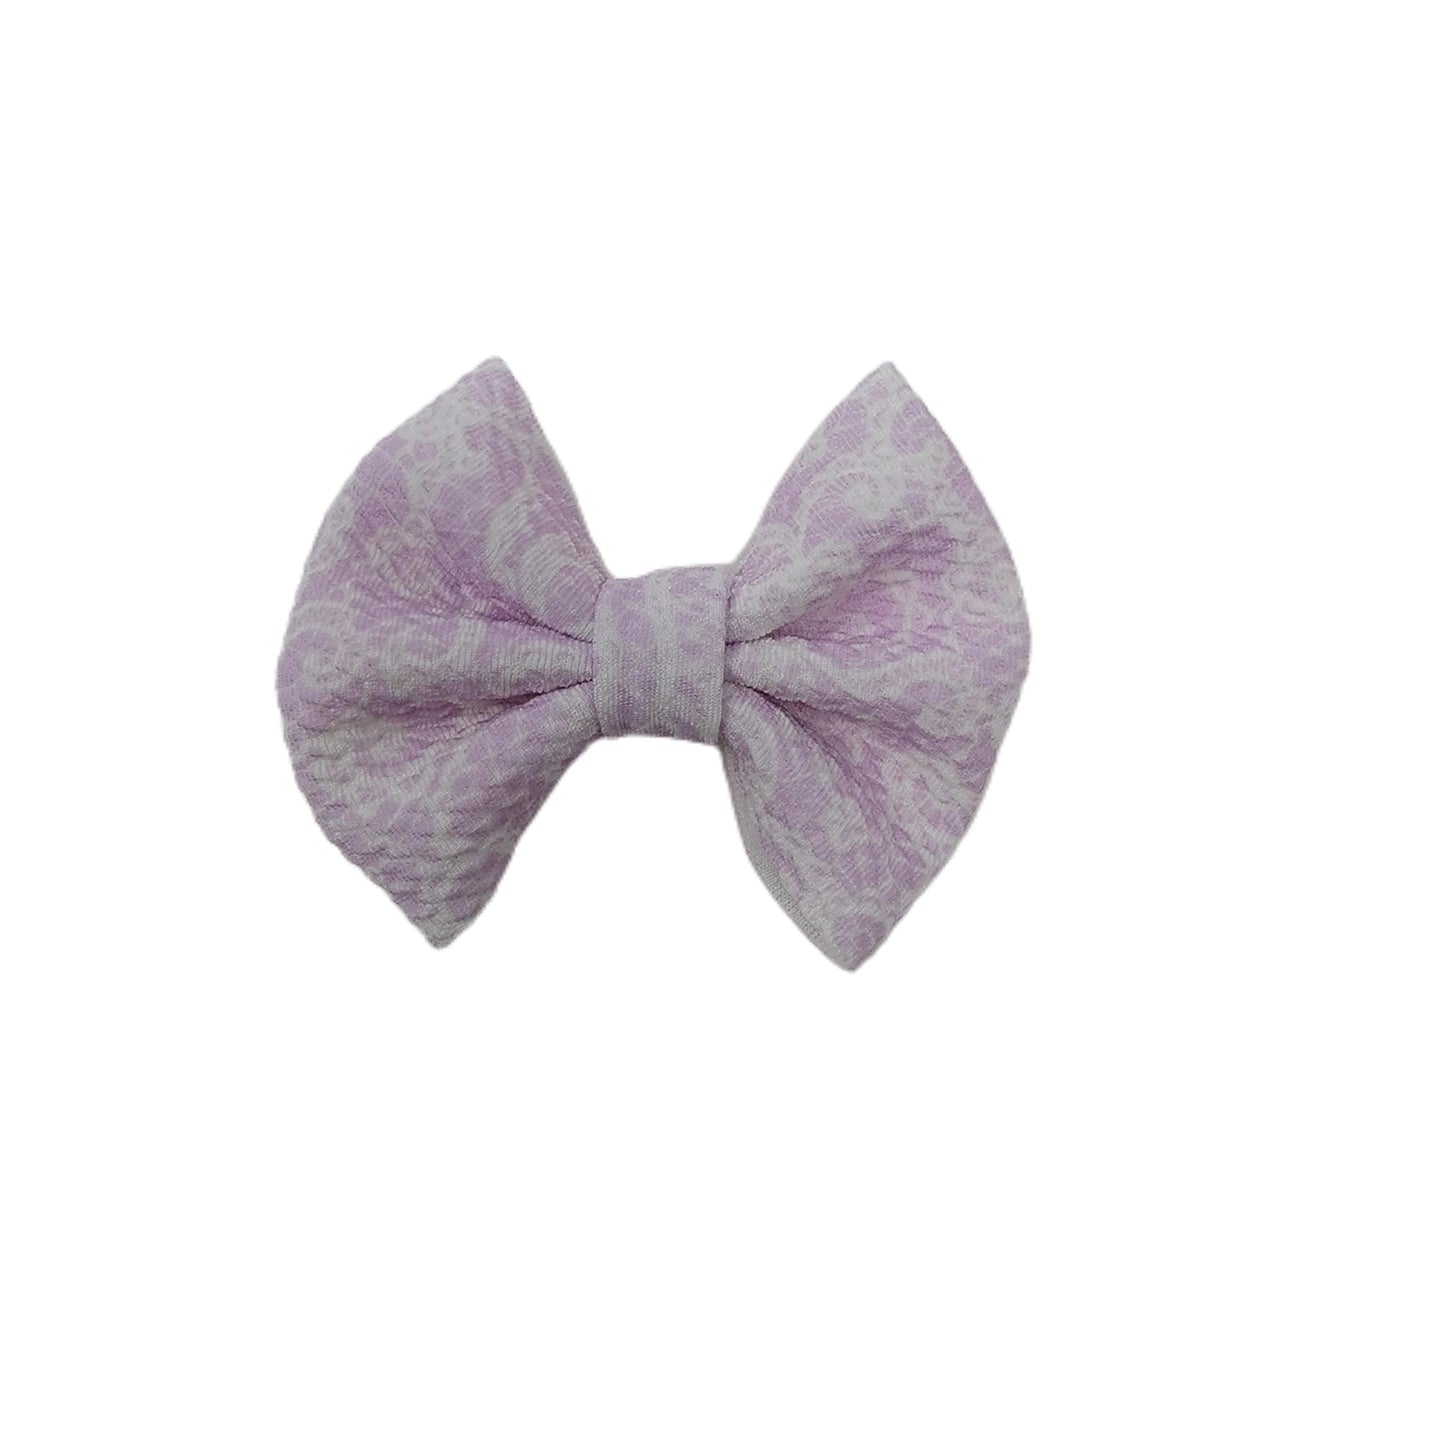 3" Lavender Lace Fabric Bow